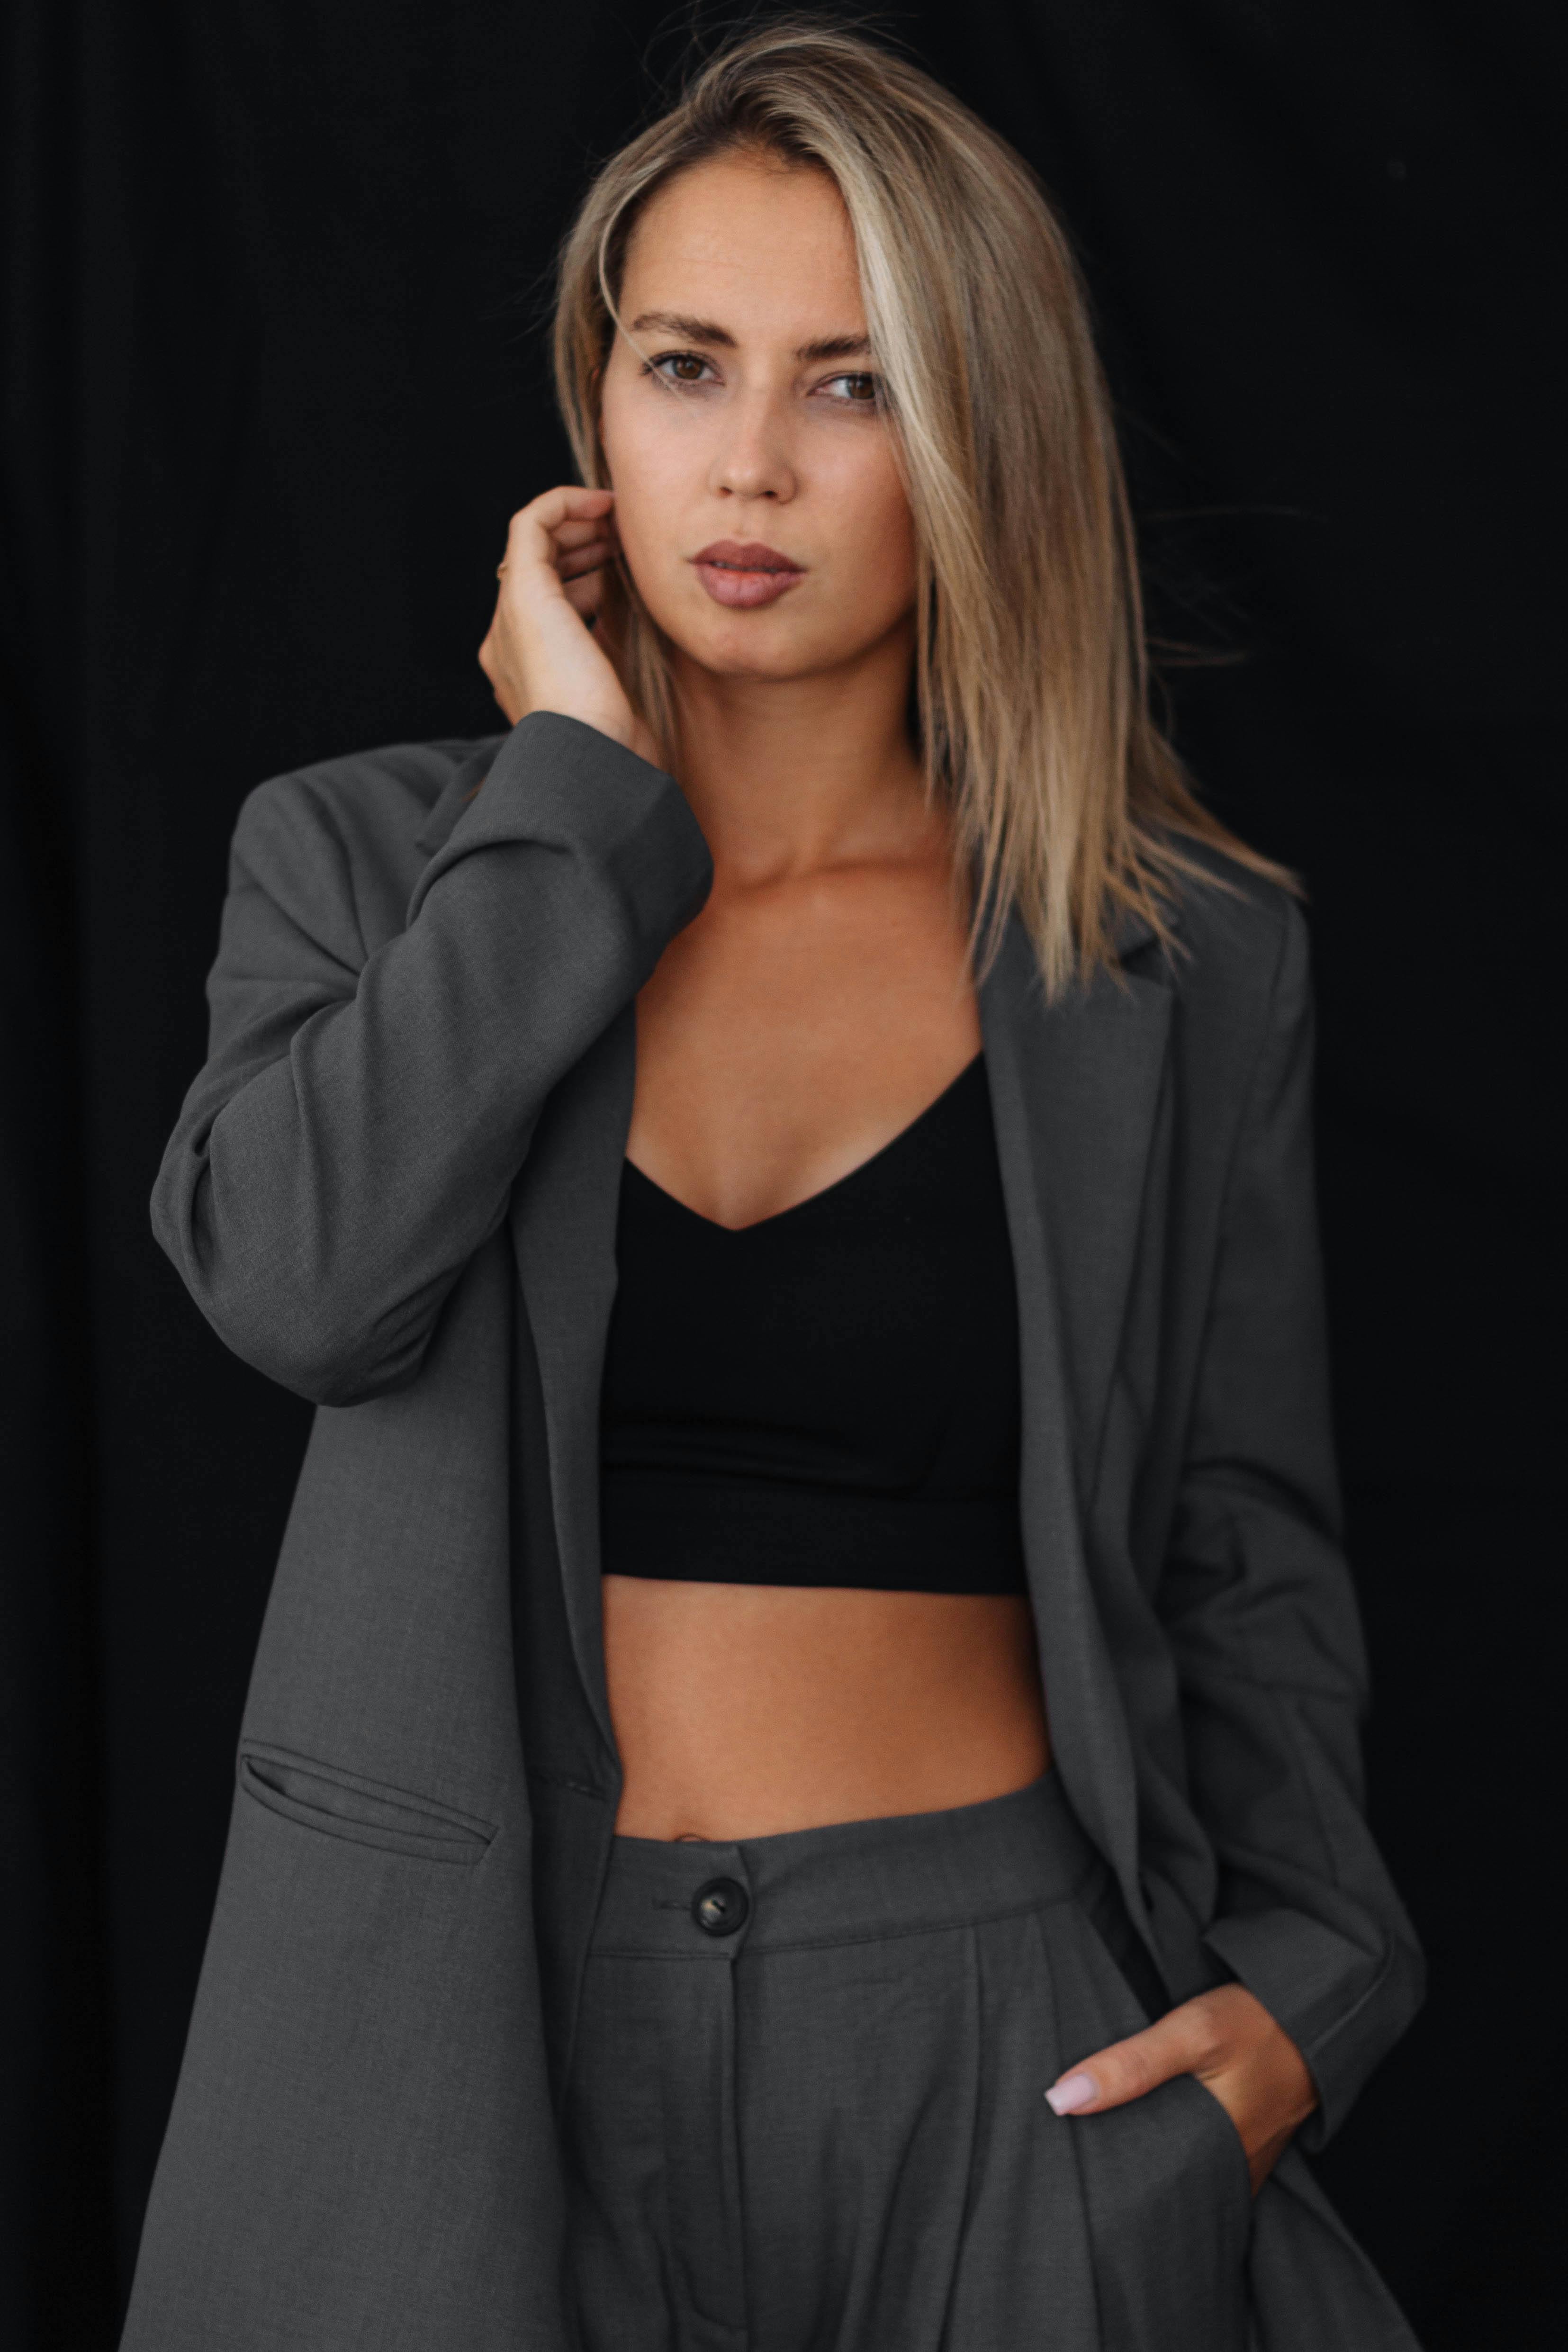 Cropped Image Of A Pretty Woman In Suit And Bra Posing In